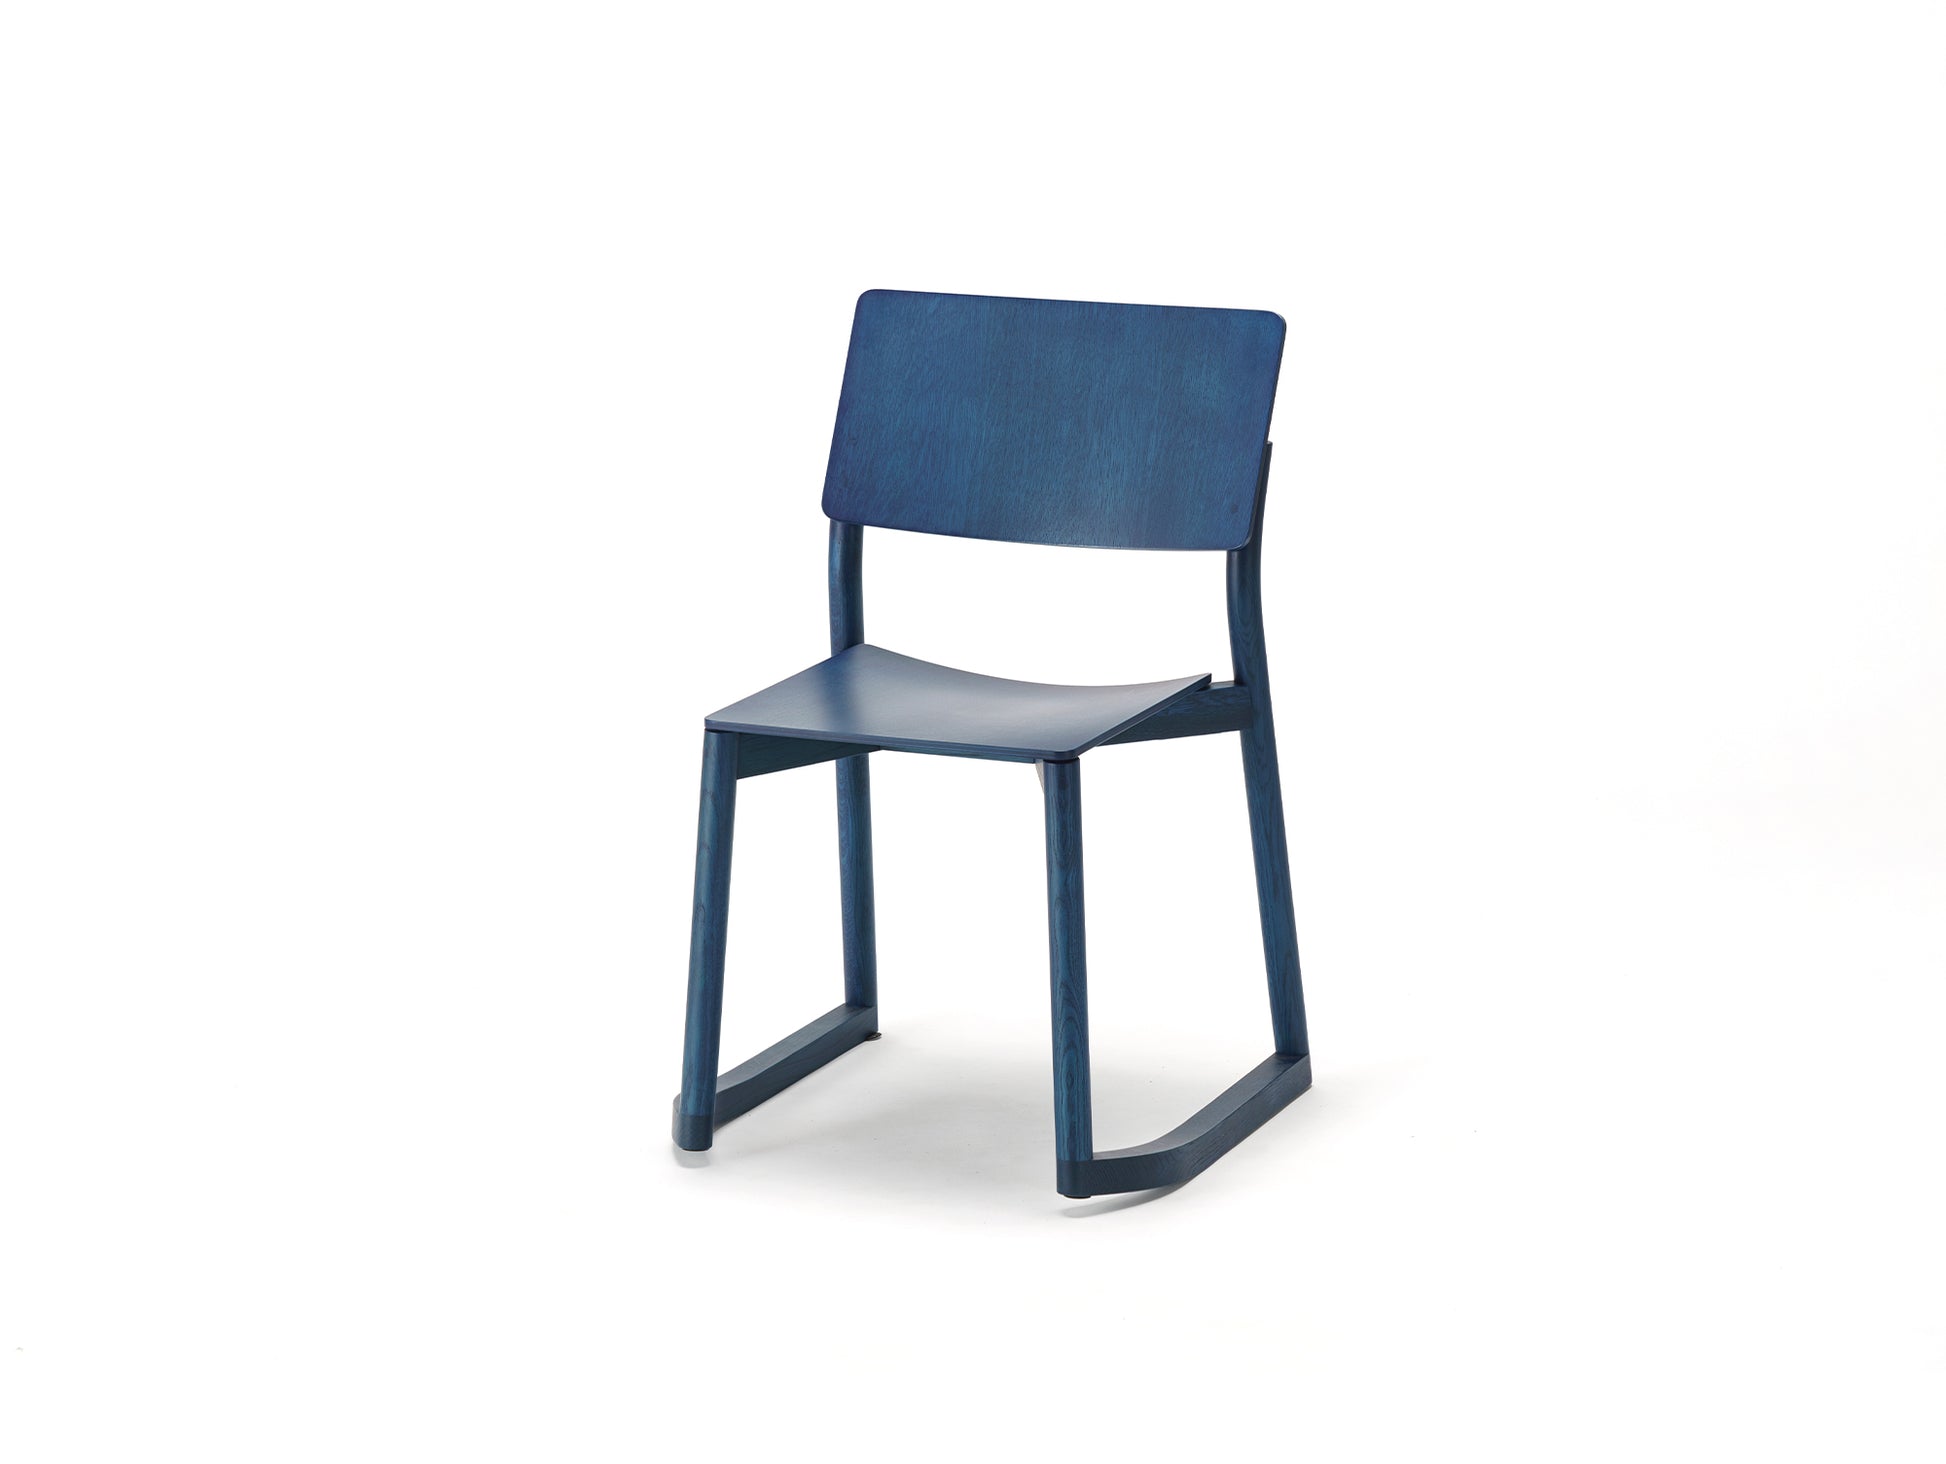 Panorama Chair with Runners by Karimoku New Standard - Indigo Blue Lacquered Oak